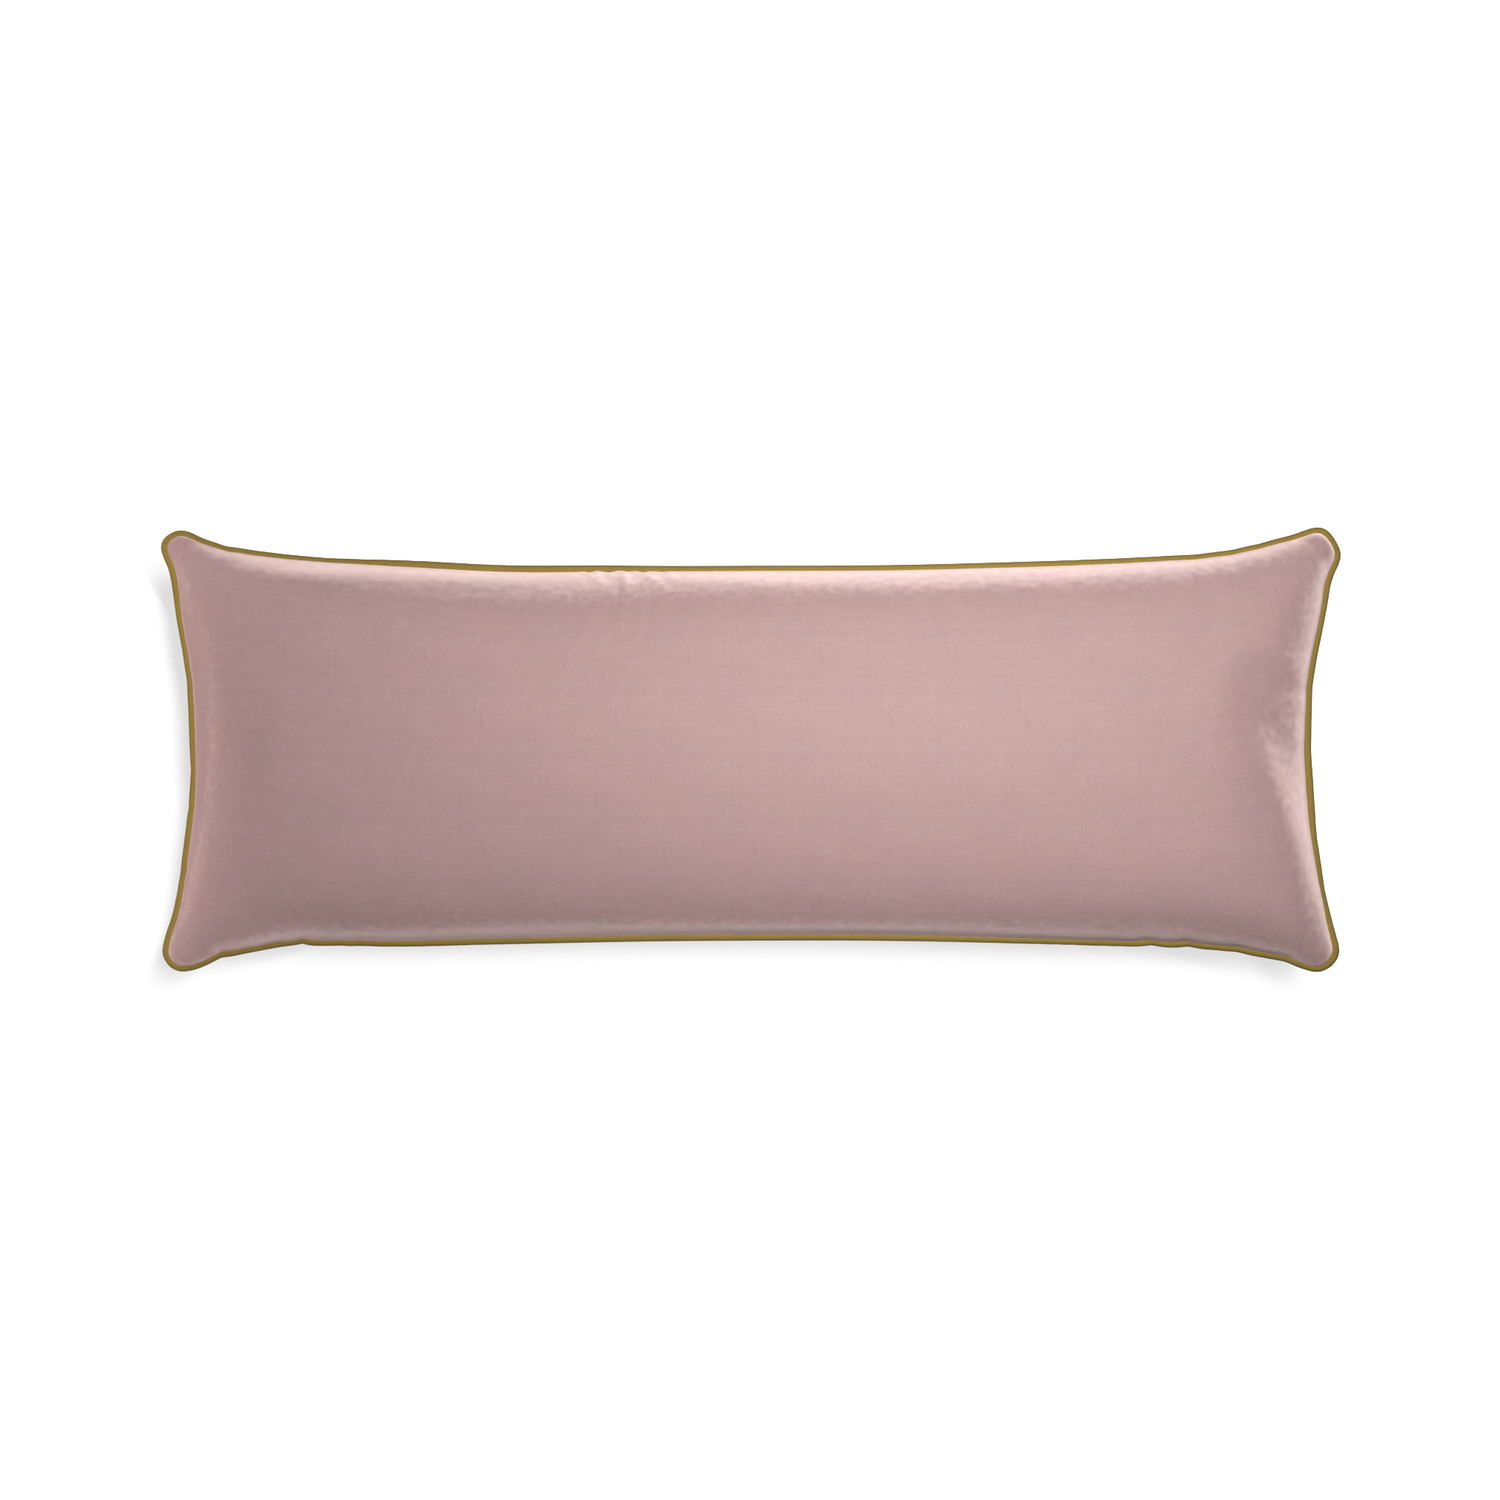 Xl-lumbar mauve velvet custom mauvepillow with c piping on white background